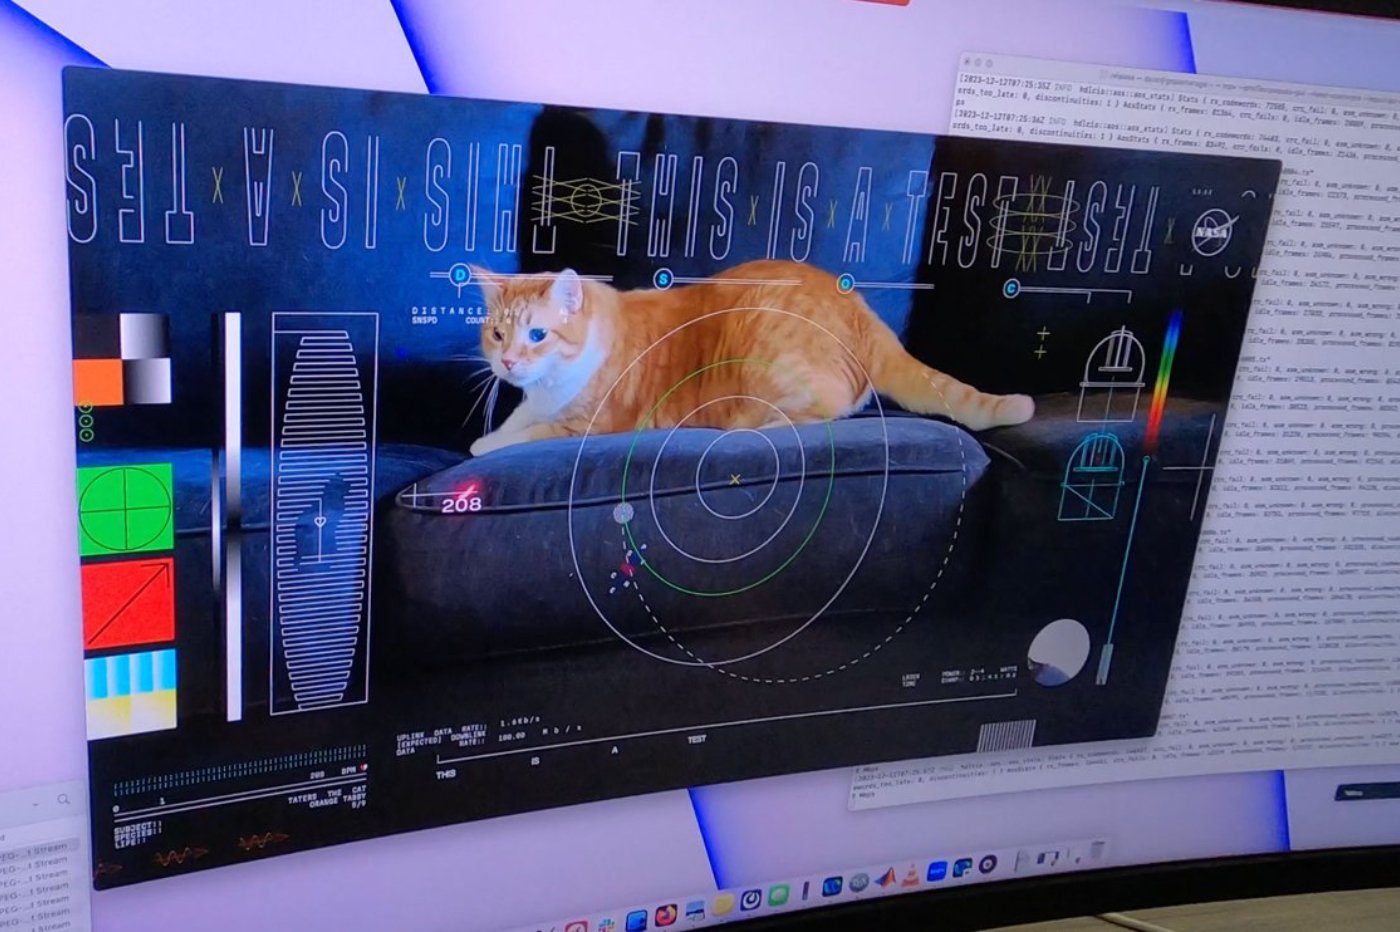 This cat has traveled more than 30 million kilometers in space thanks to NASA's laser